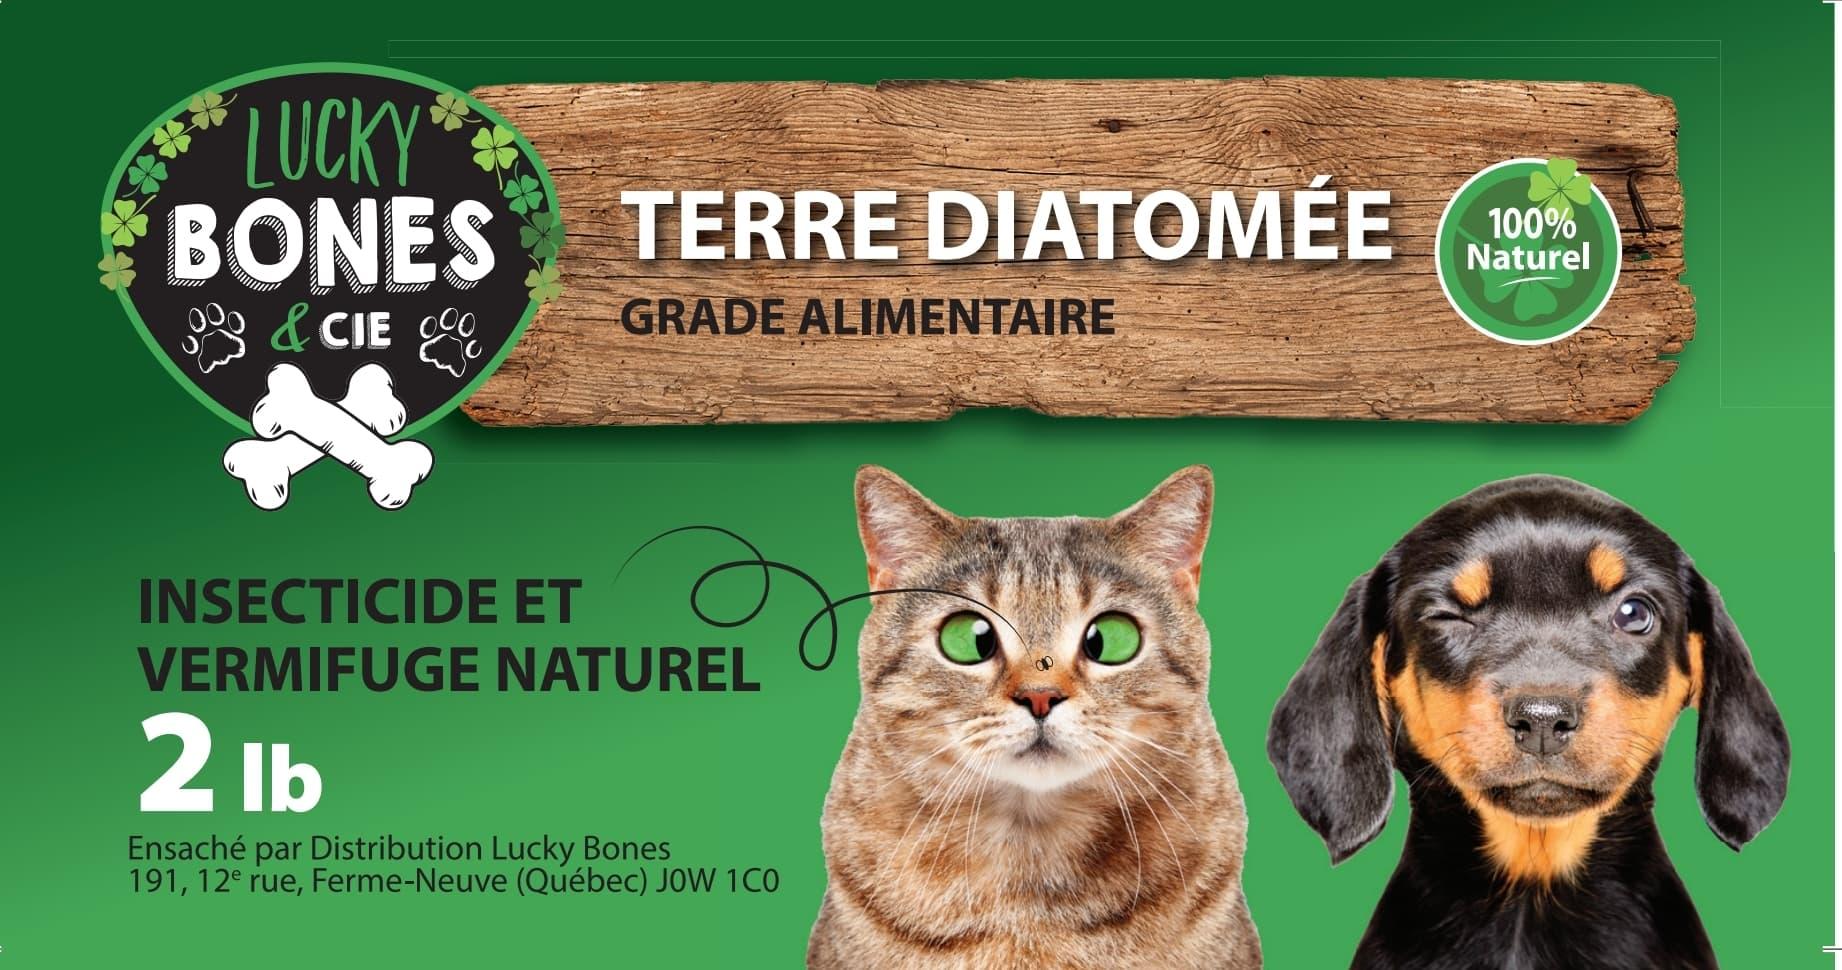 Terre diatomée grade alimentaire – Stardust synergie canine